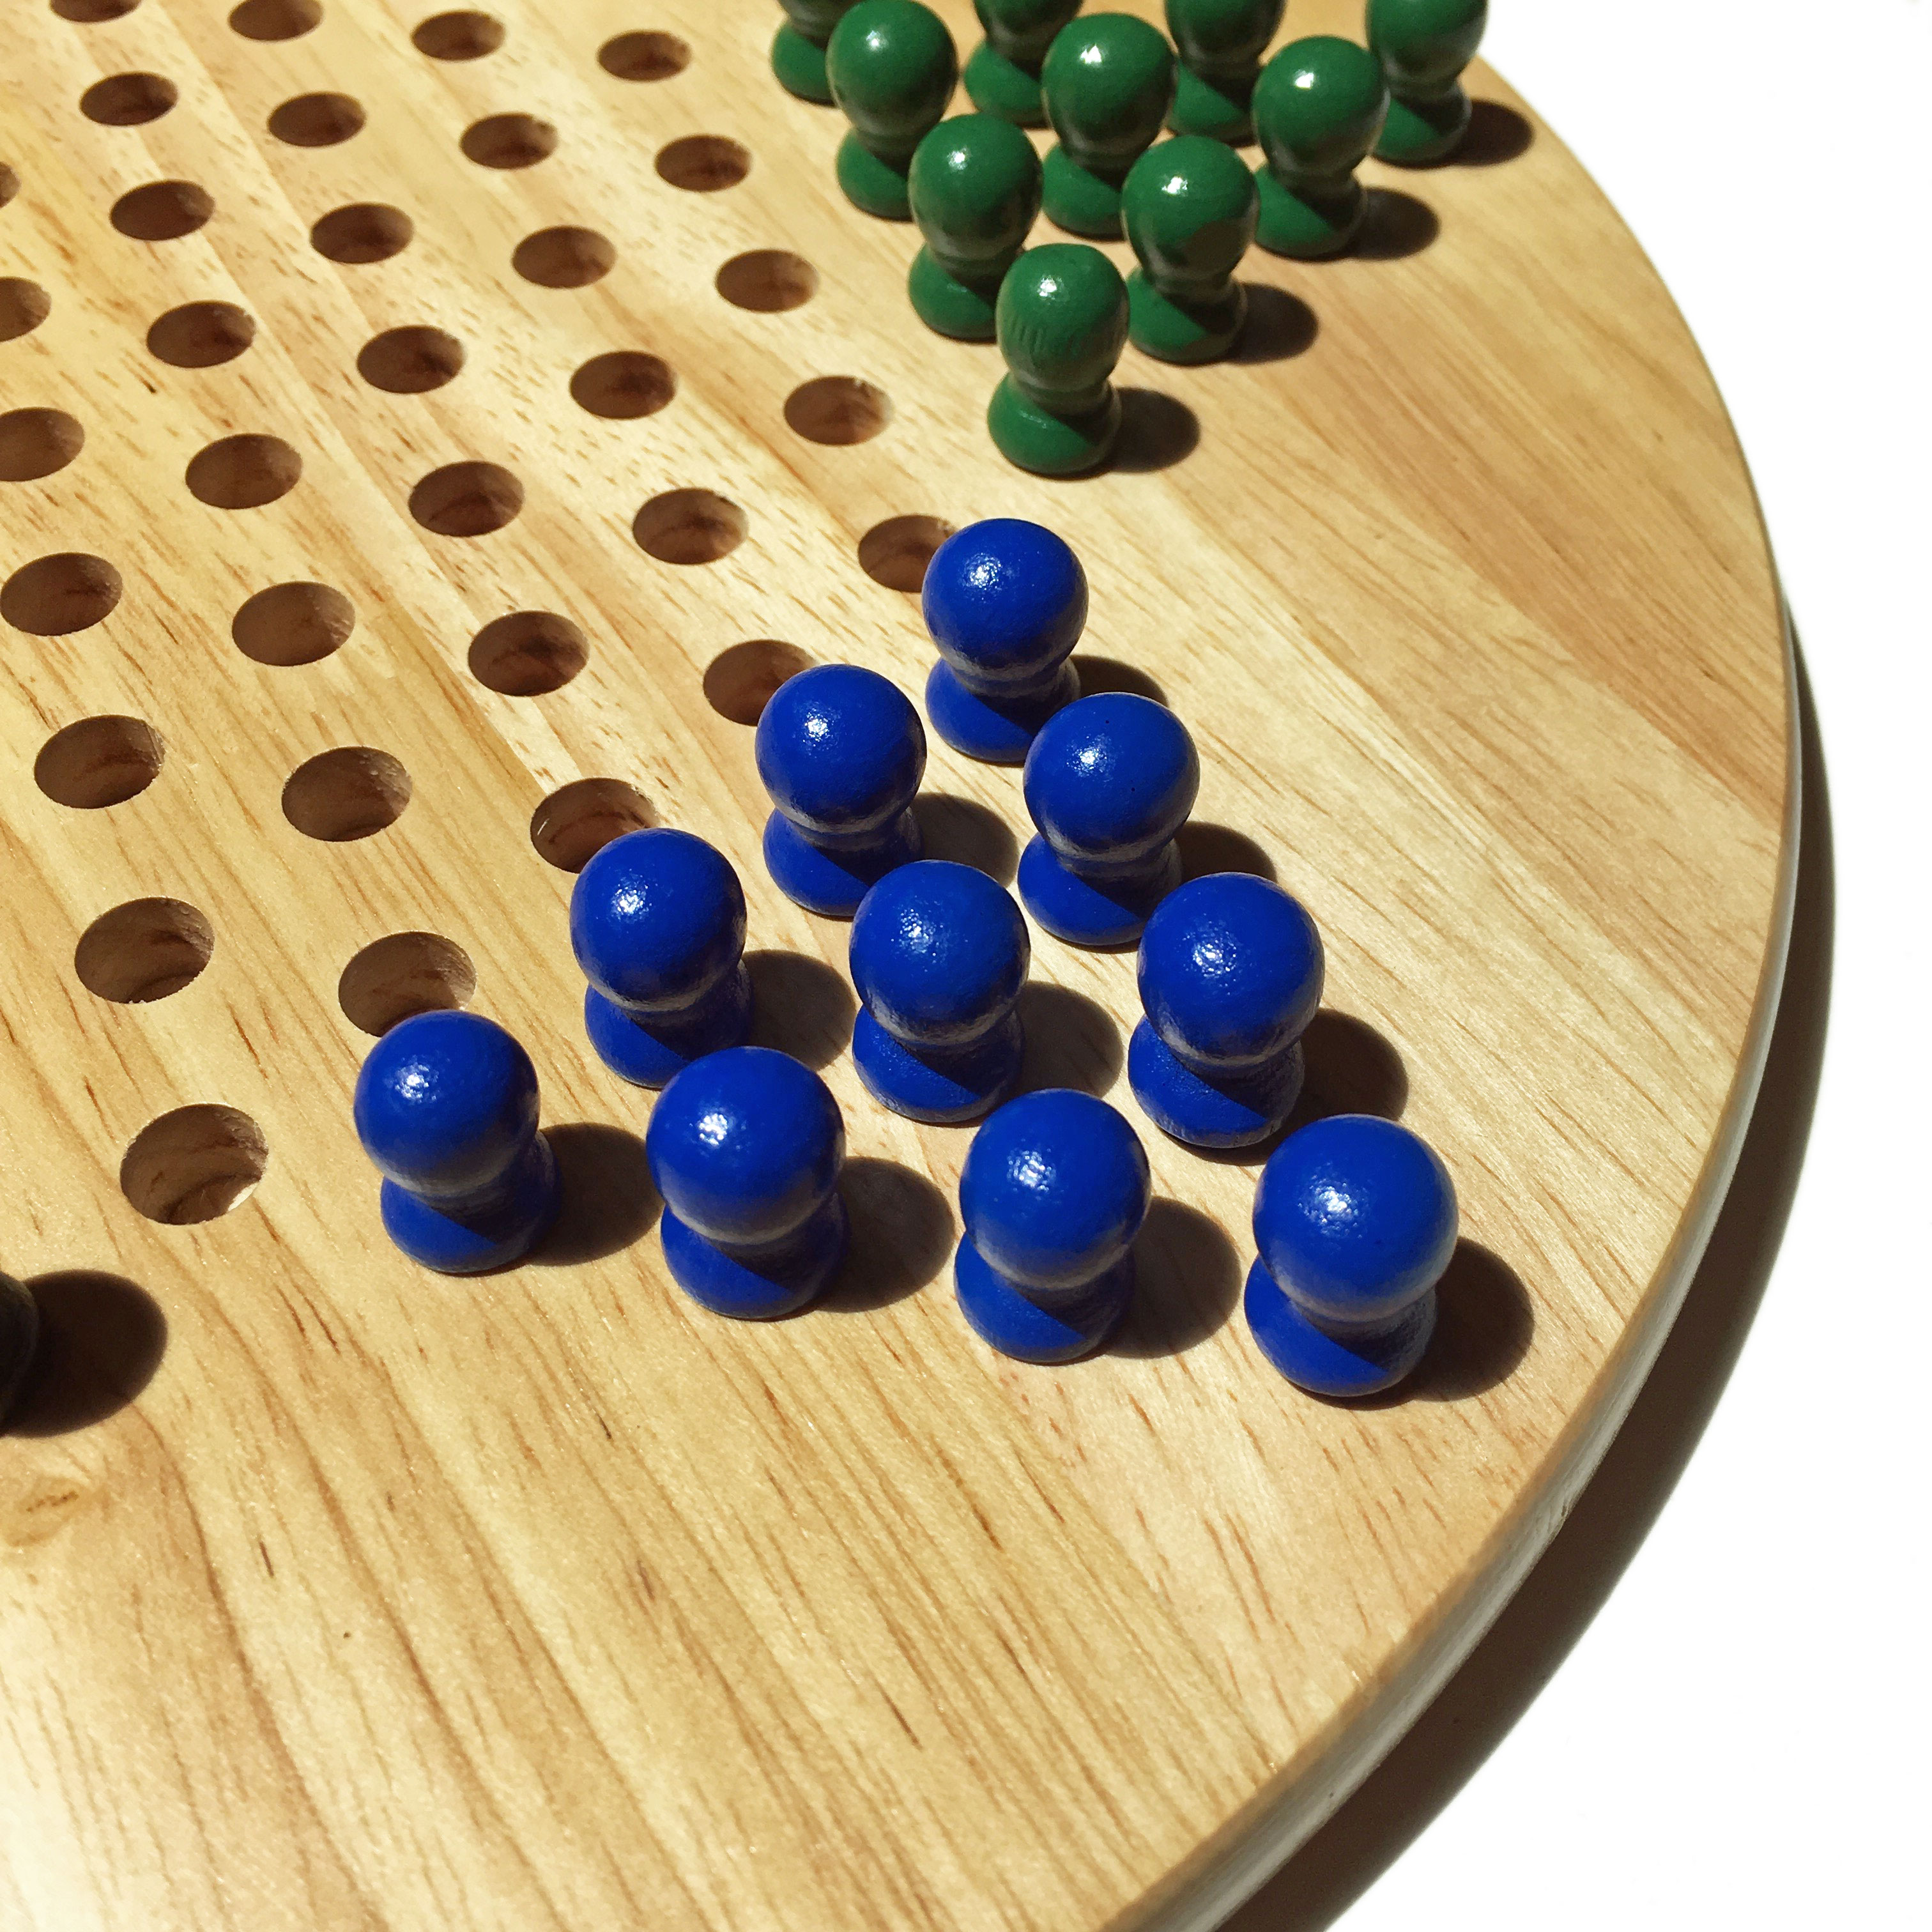 Replacement Wooden Pegs for Chinese Checkers 658956930010 for sale online